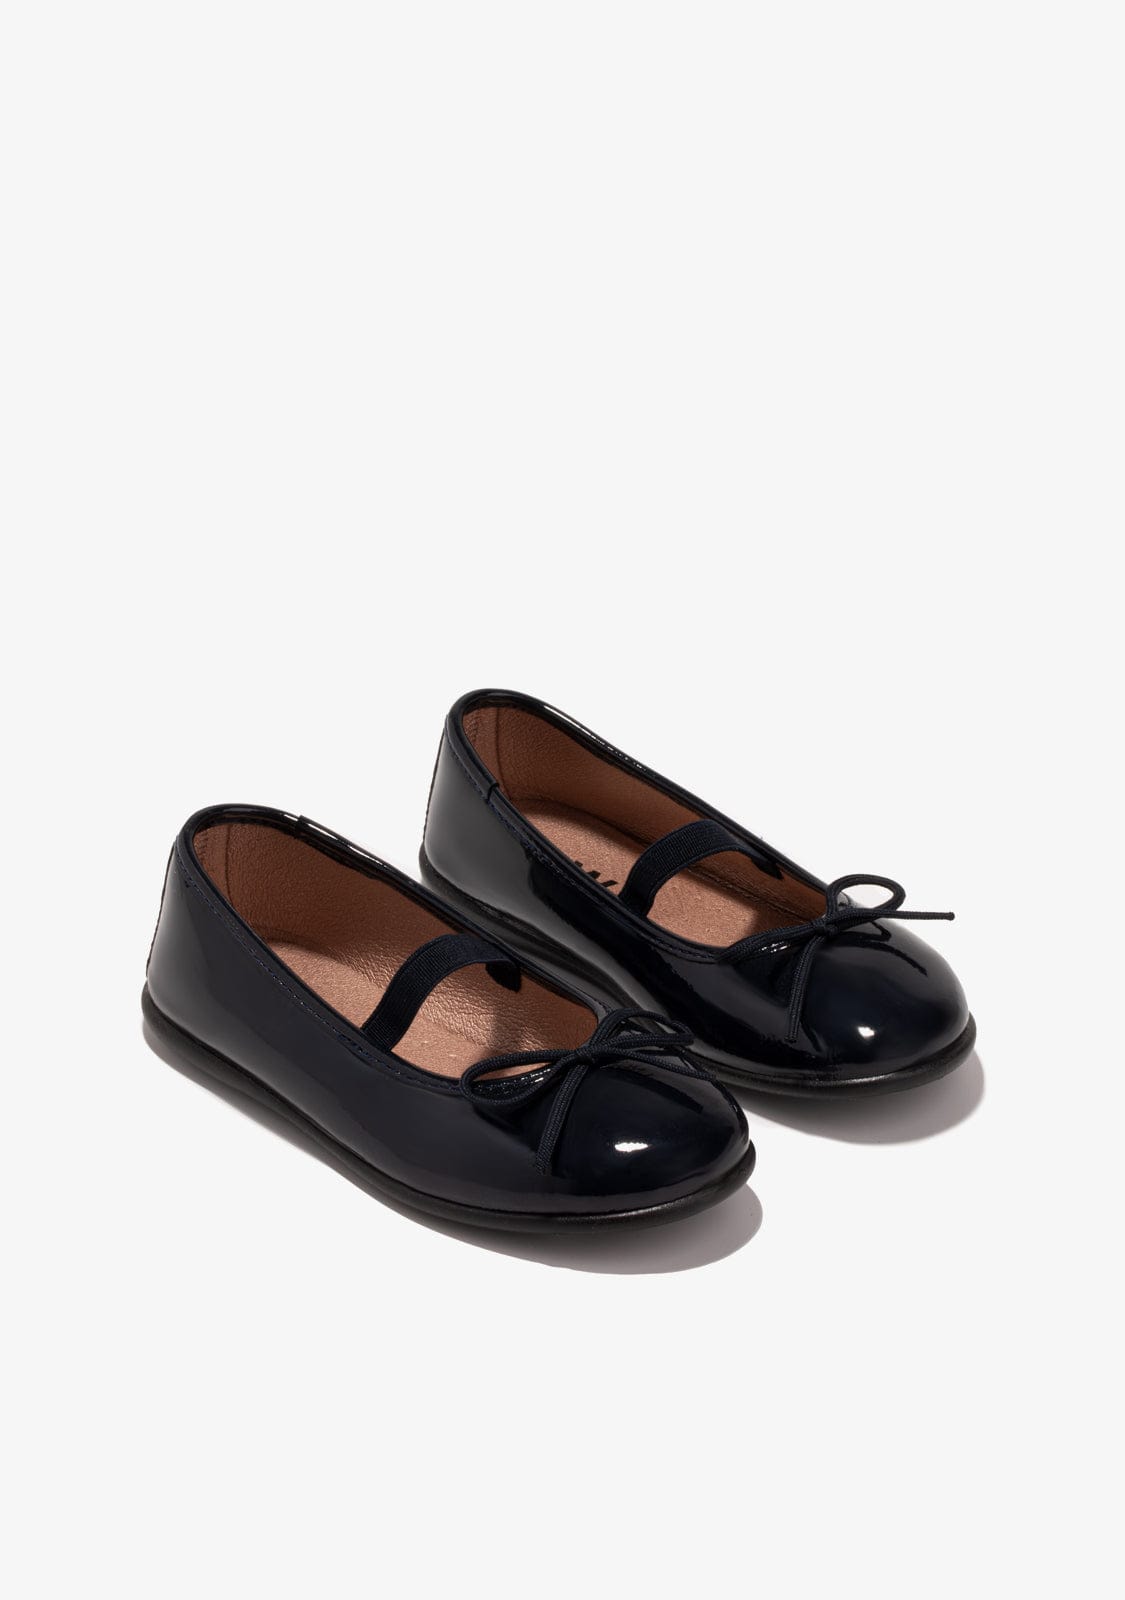 B&W JUNIOR Shoes Girl's Navy Ballerinas Patent Leather B&W